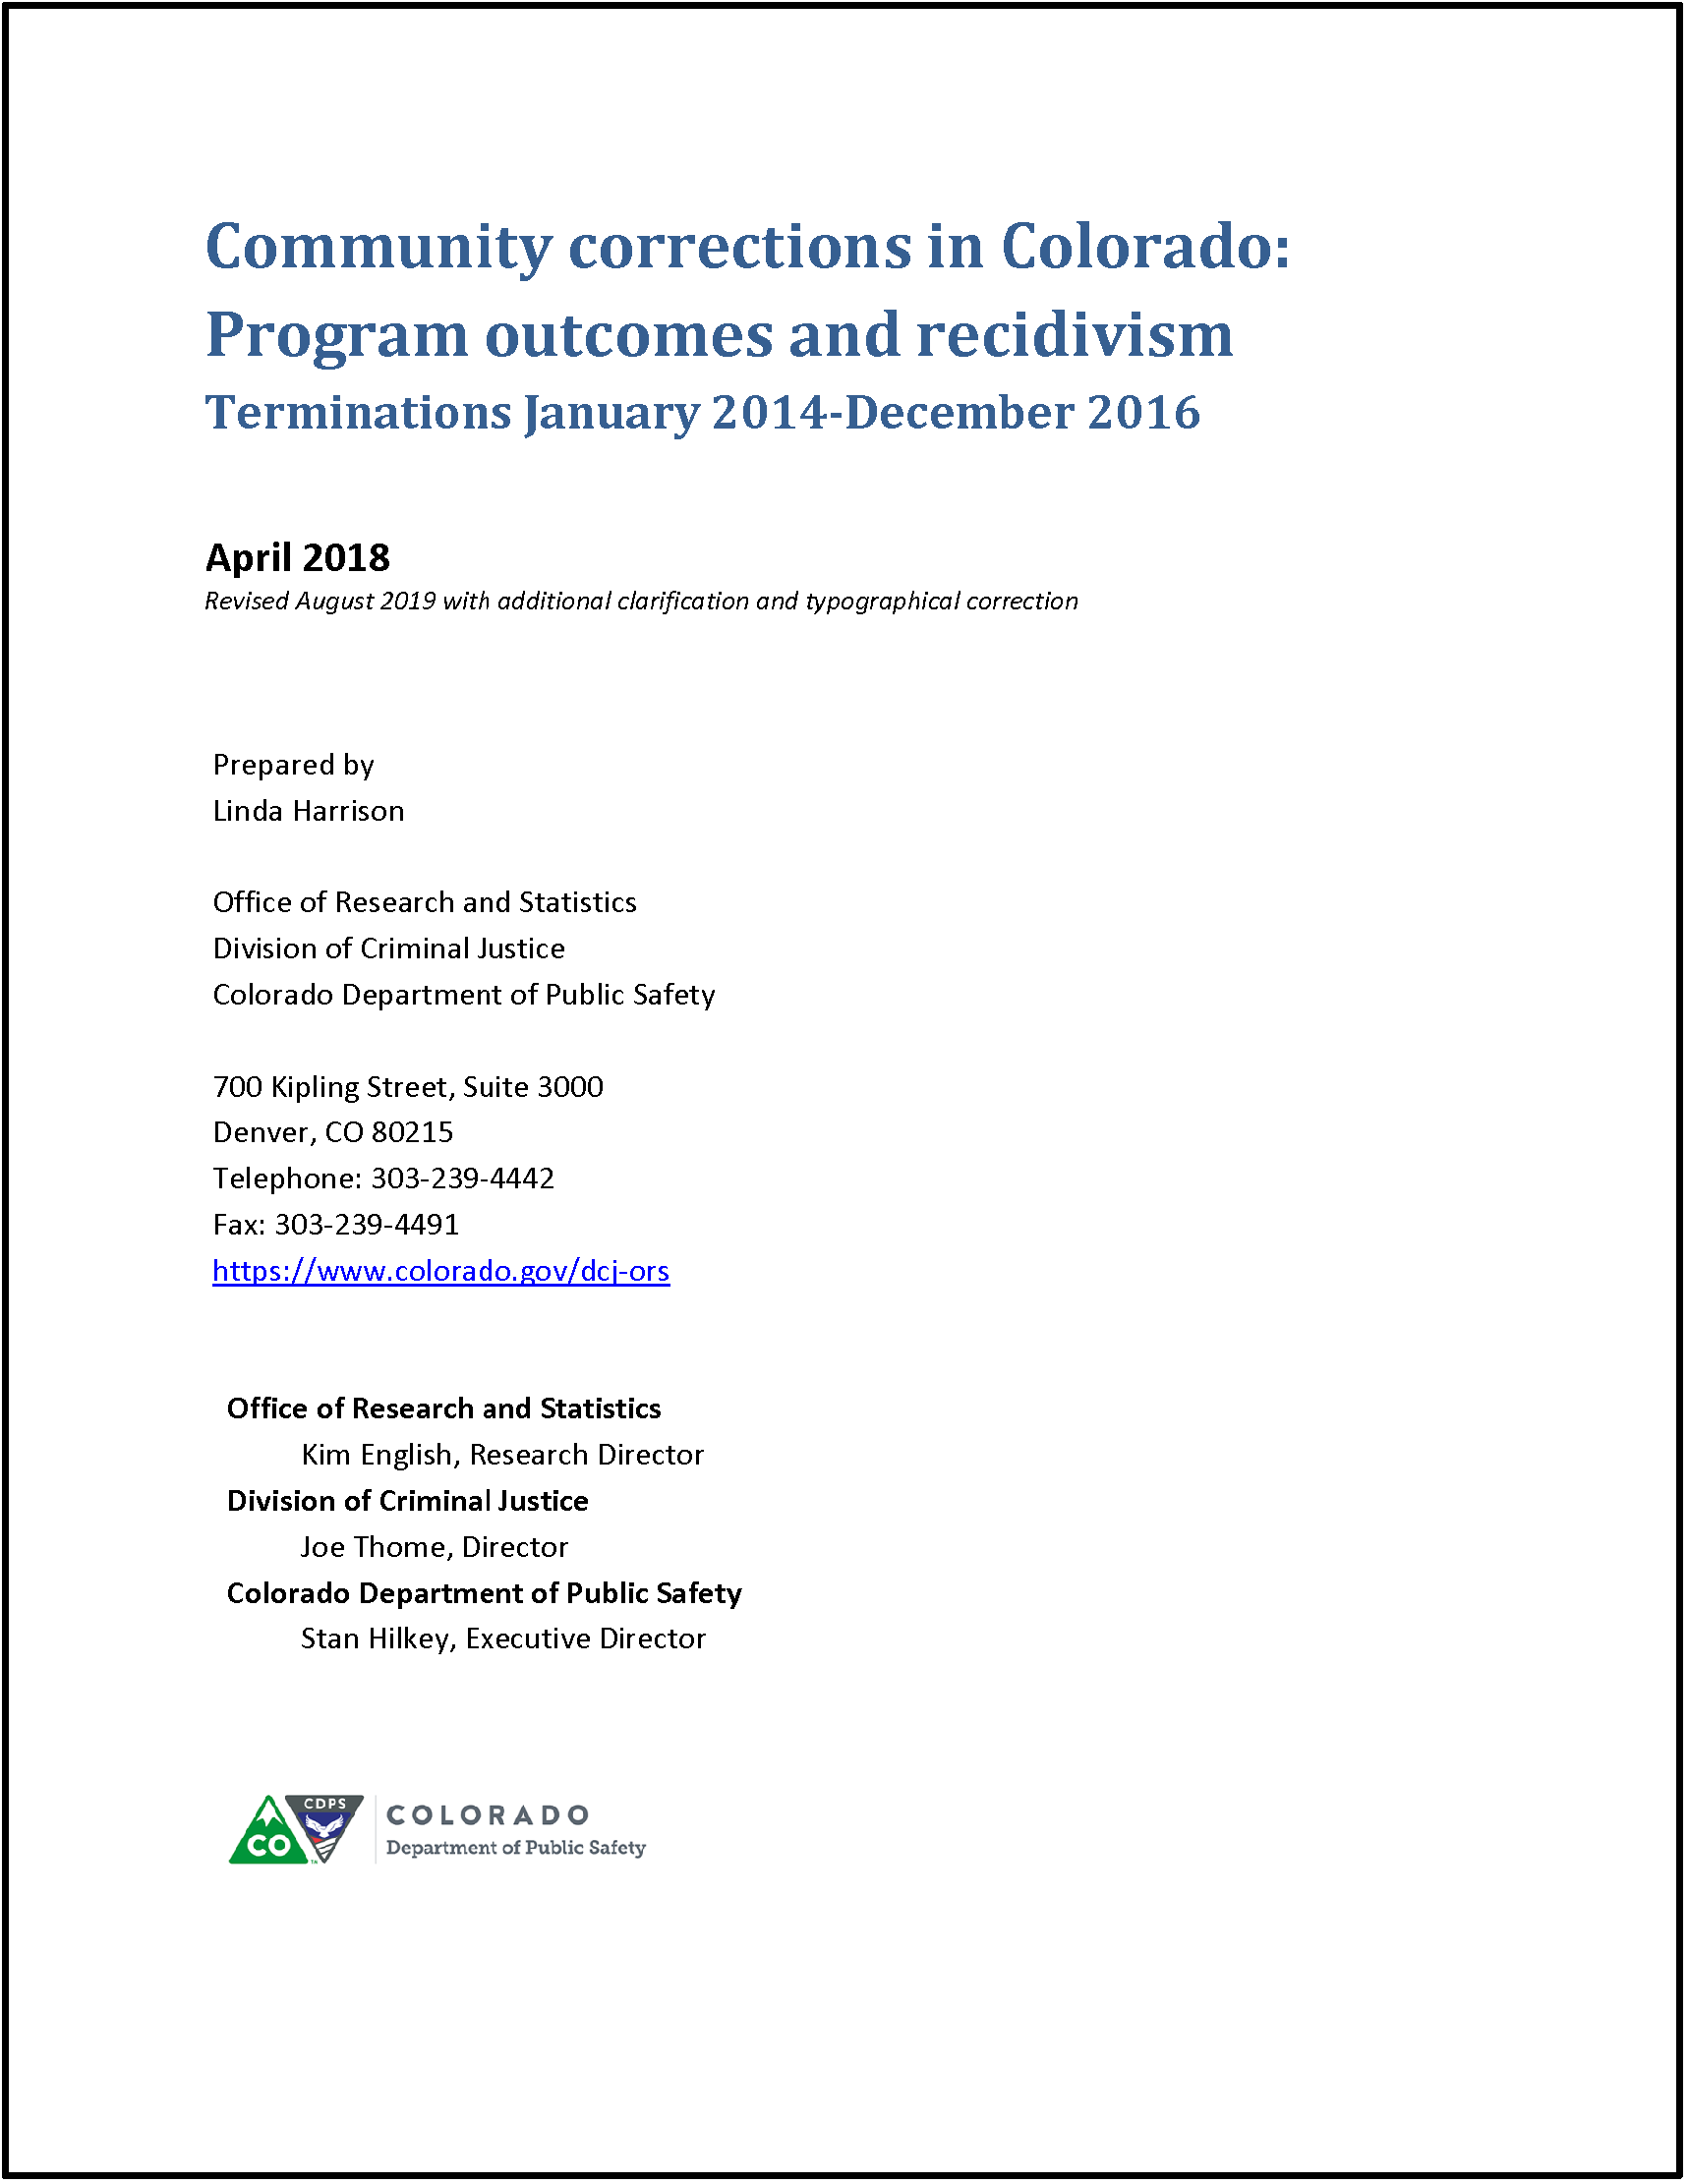 Community Corrections in Colorado: Program Outcomes and Recidivism, Terminations January 2014-December 2016 (April 2018)